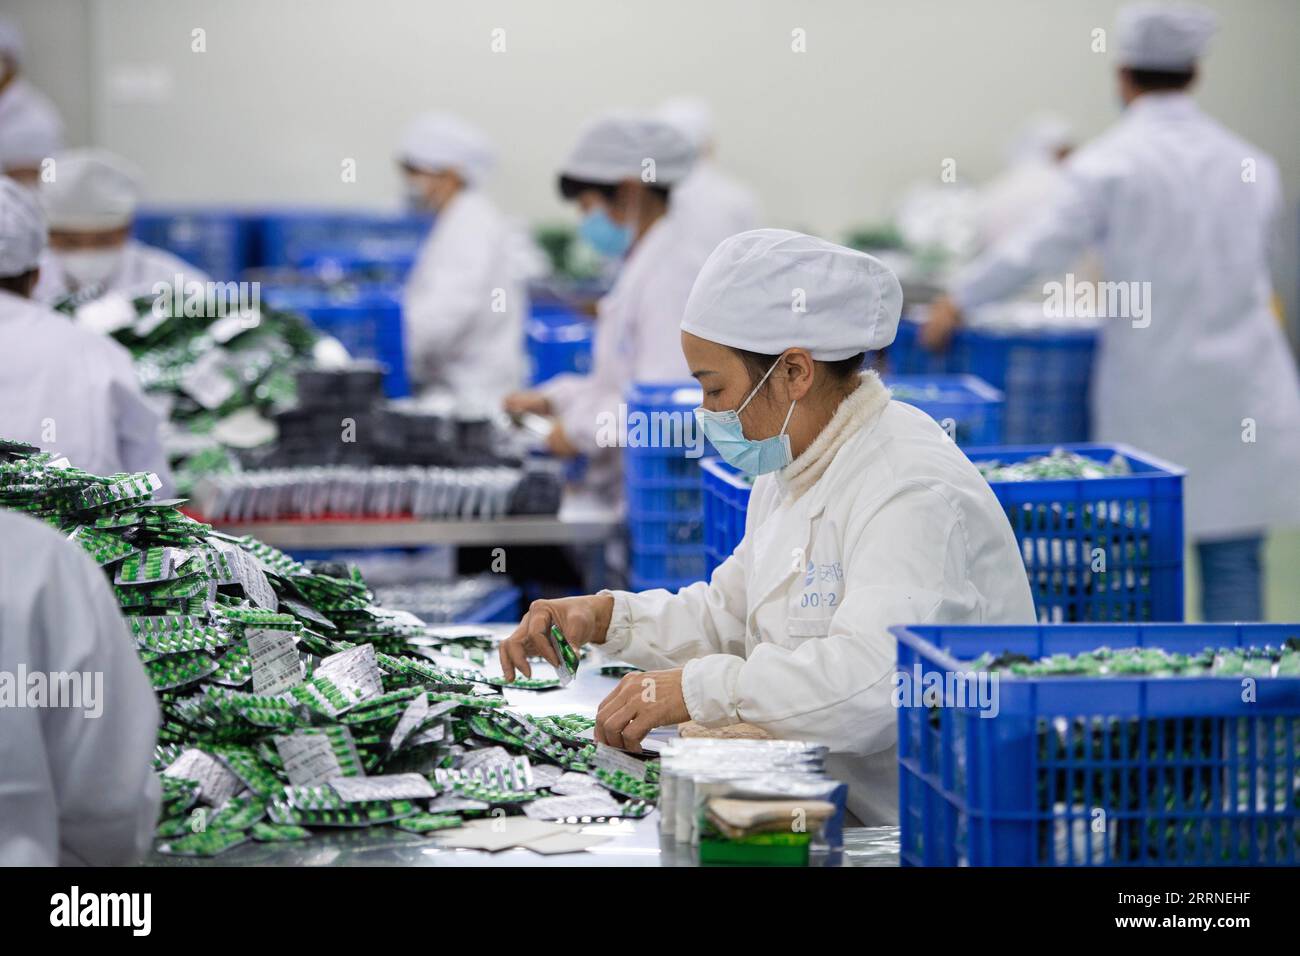 230107 -- BEIJING, Jan. 7, 2023 -- Staff members pack medicines at a pharmaceutical company in central China s Hunan Province, Dec. 19, 2022.  Xinhua Headlines: Six fallacies and truths about China s epidemic control ChenxSihan PUBLICATIONxNOTxINxCHN Stock Photo